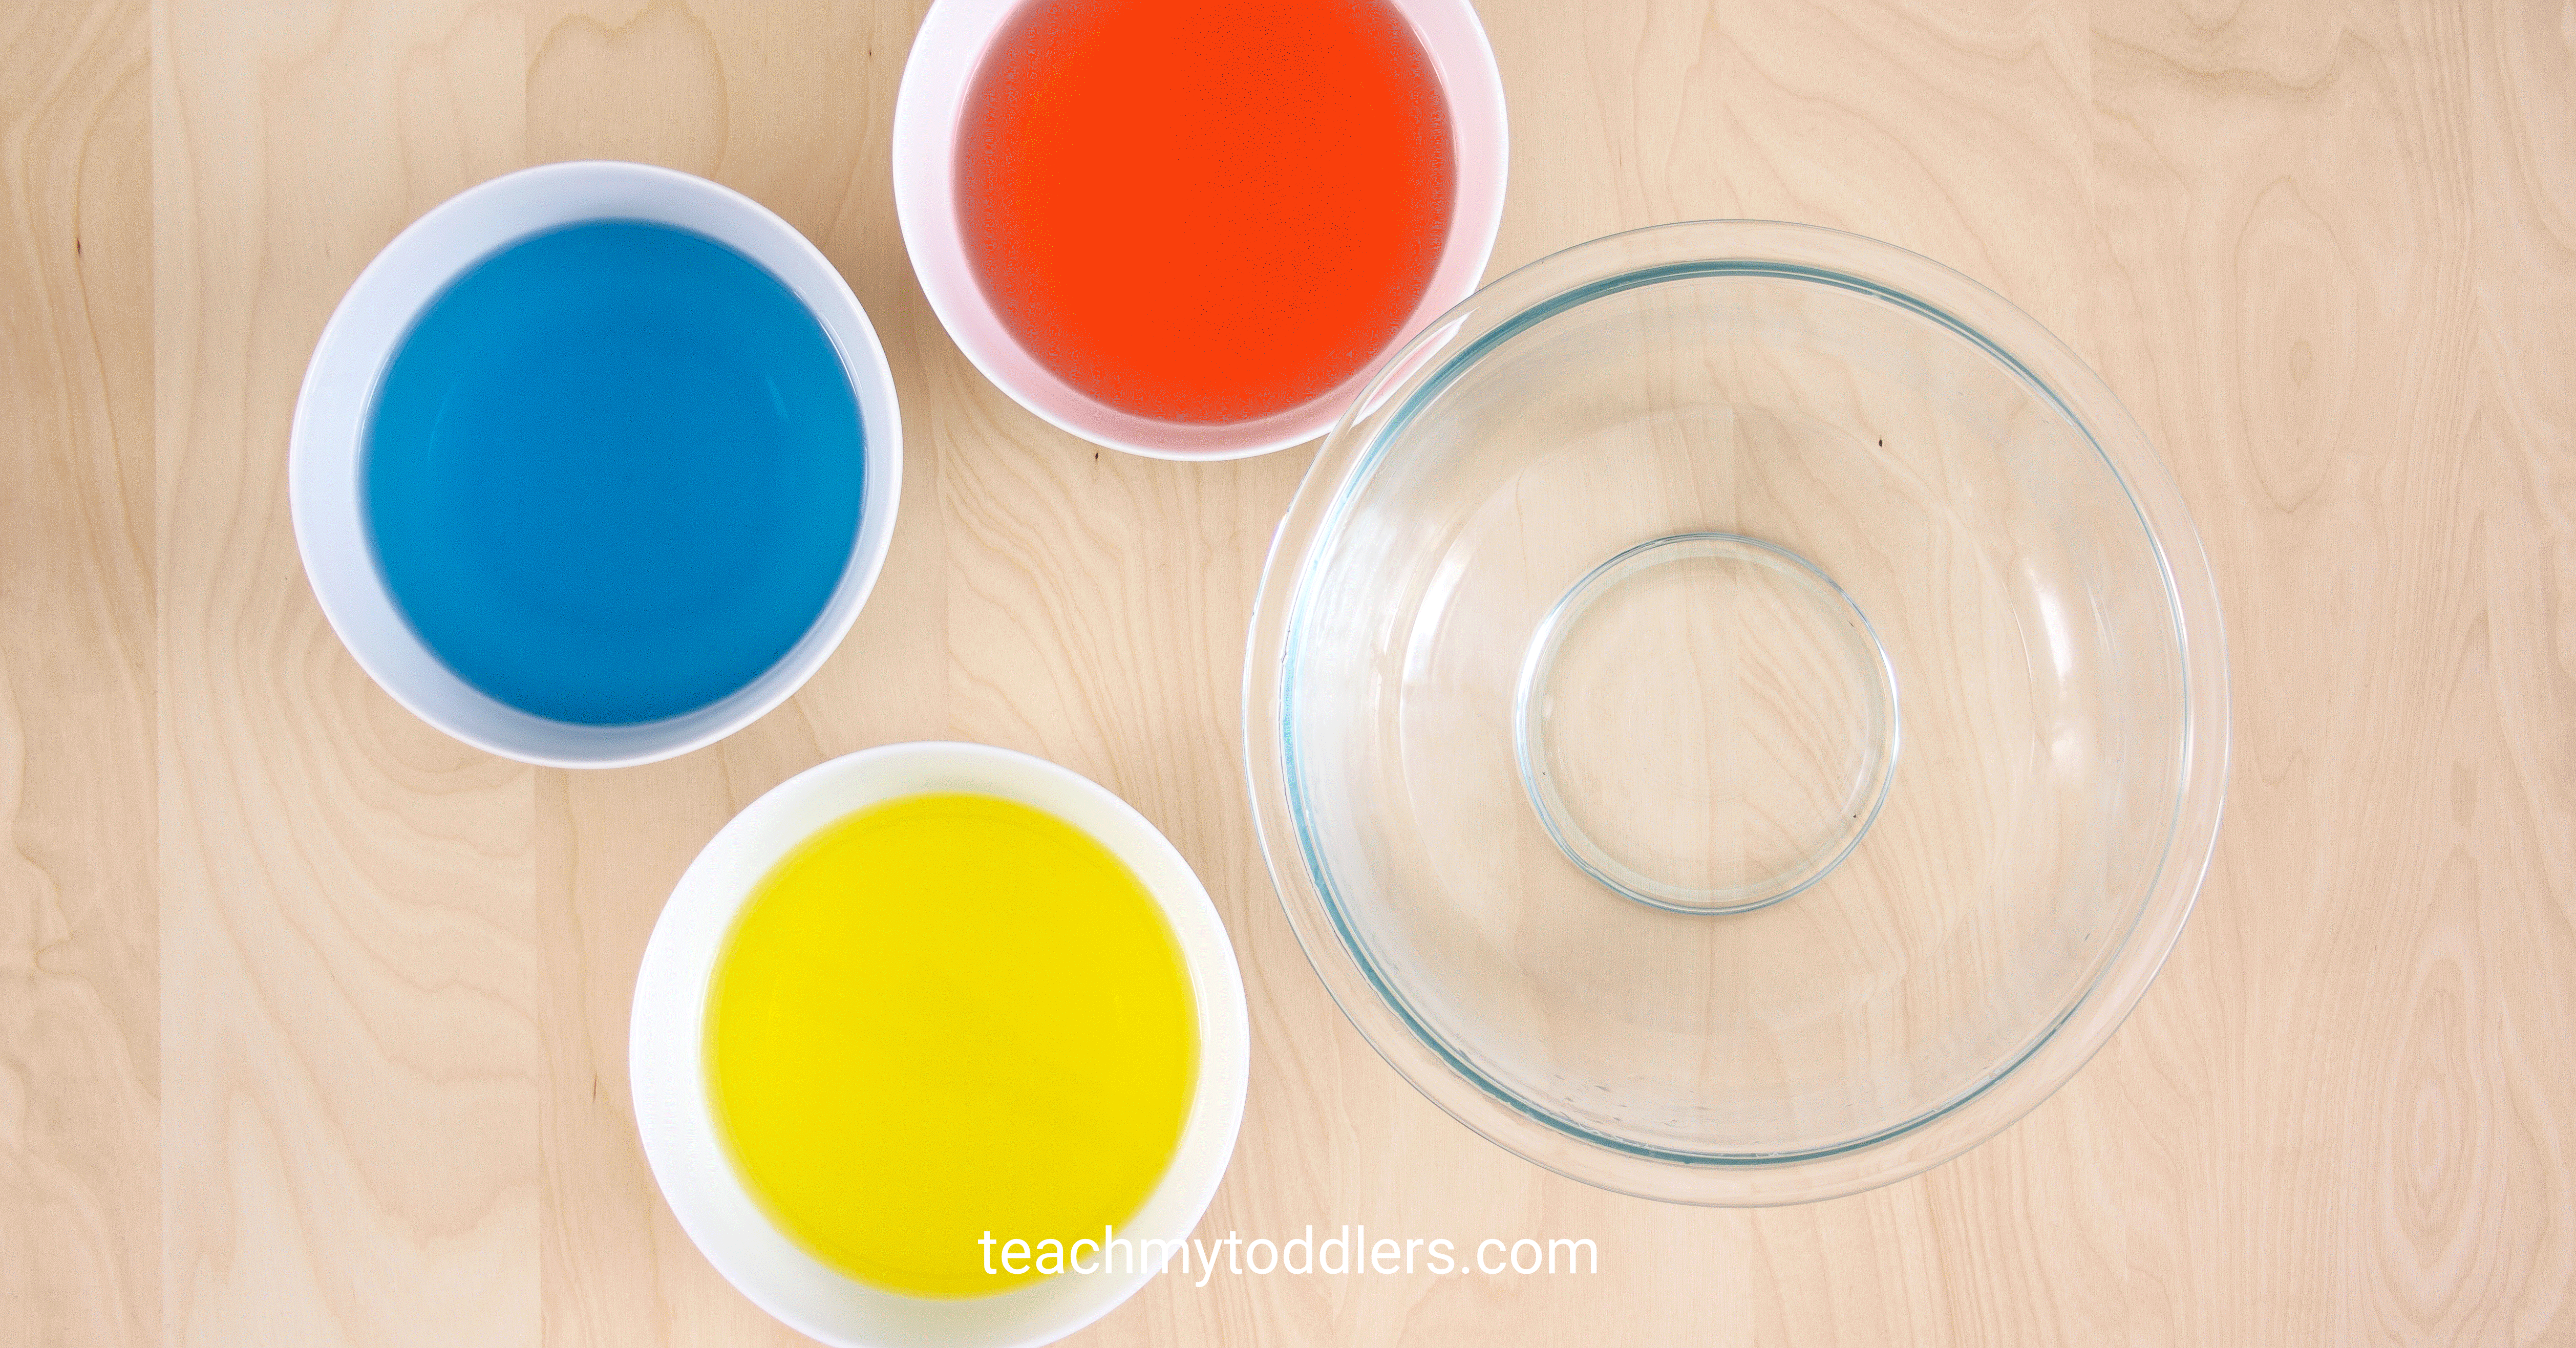 yellow-blue-mix-green-gif-example-teach-your-toddlers-colors